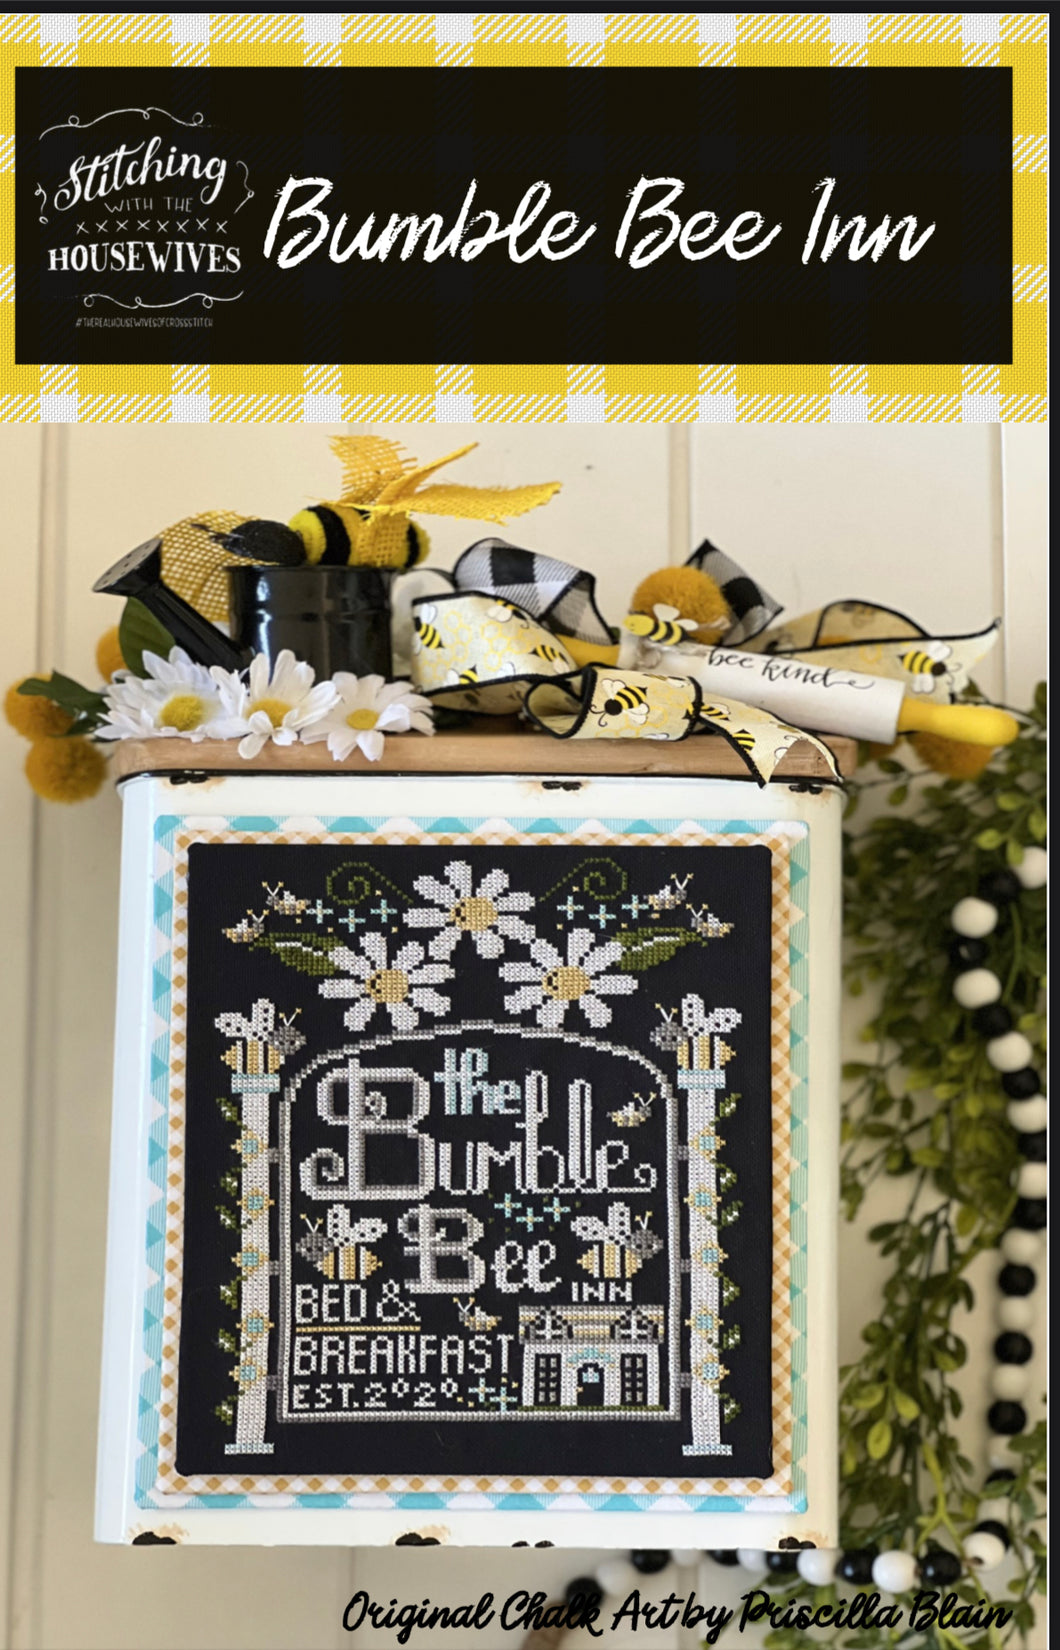 Bumble Bee Inn by Stitching with the Housewives